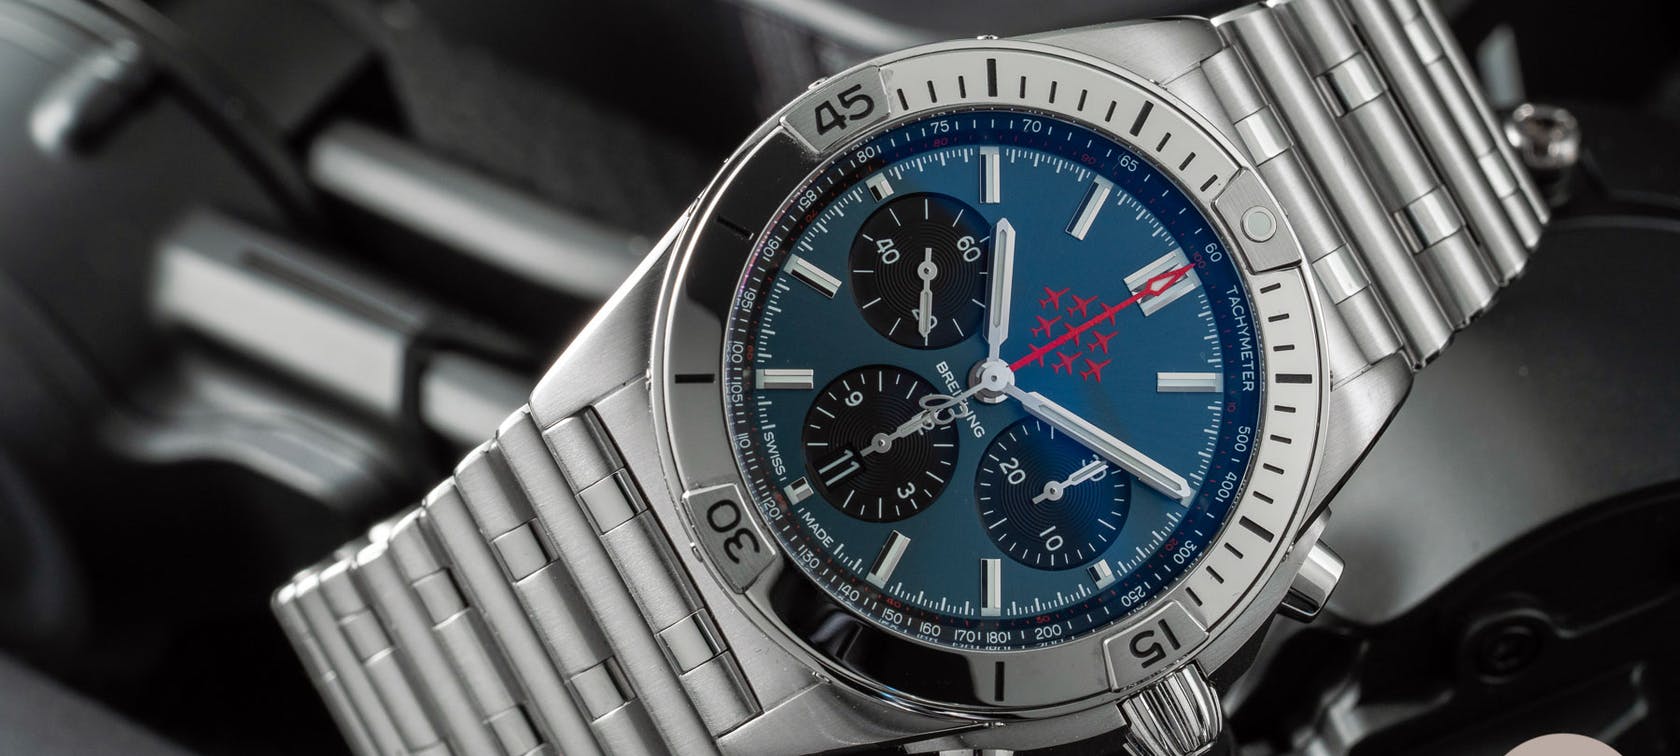 Five Most Underrated Luxury Watches That Deserve Your Attention